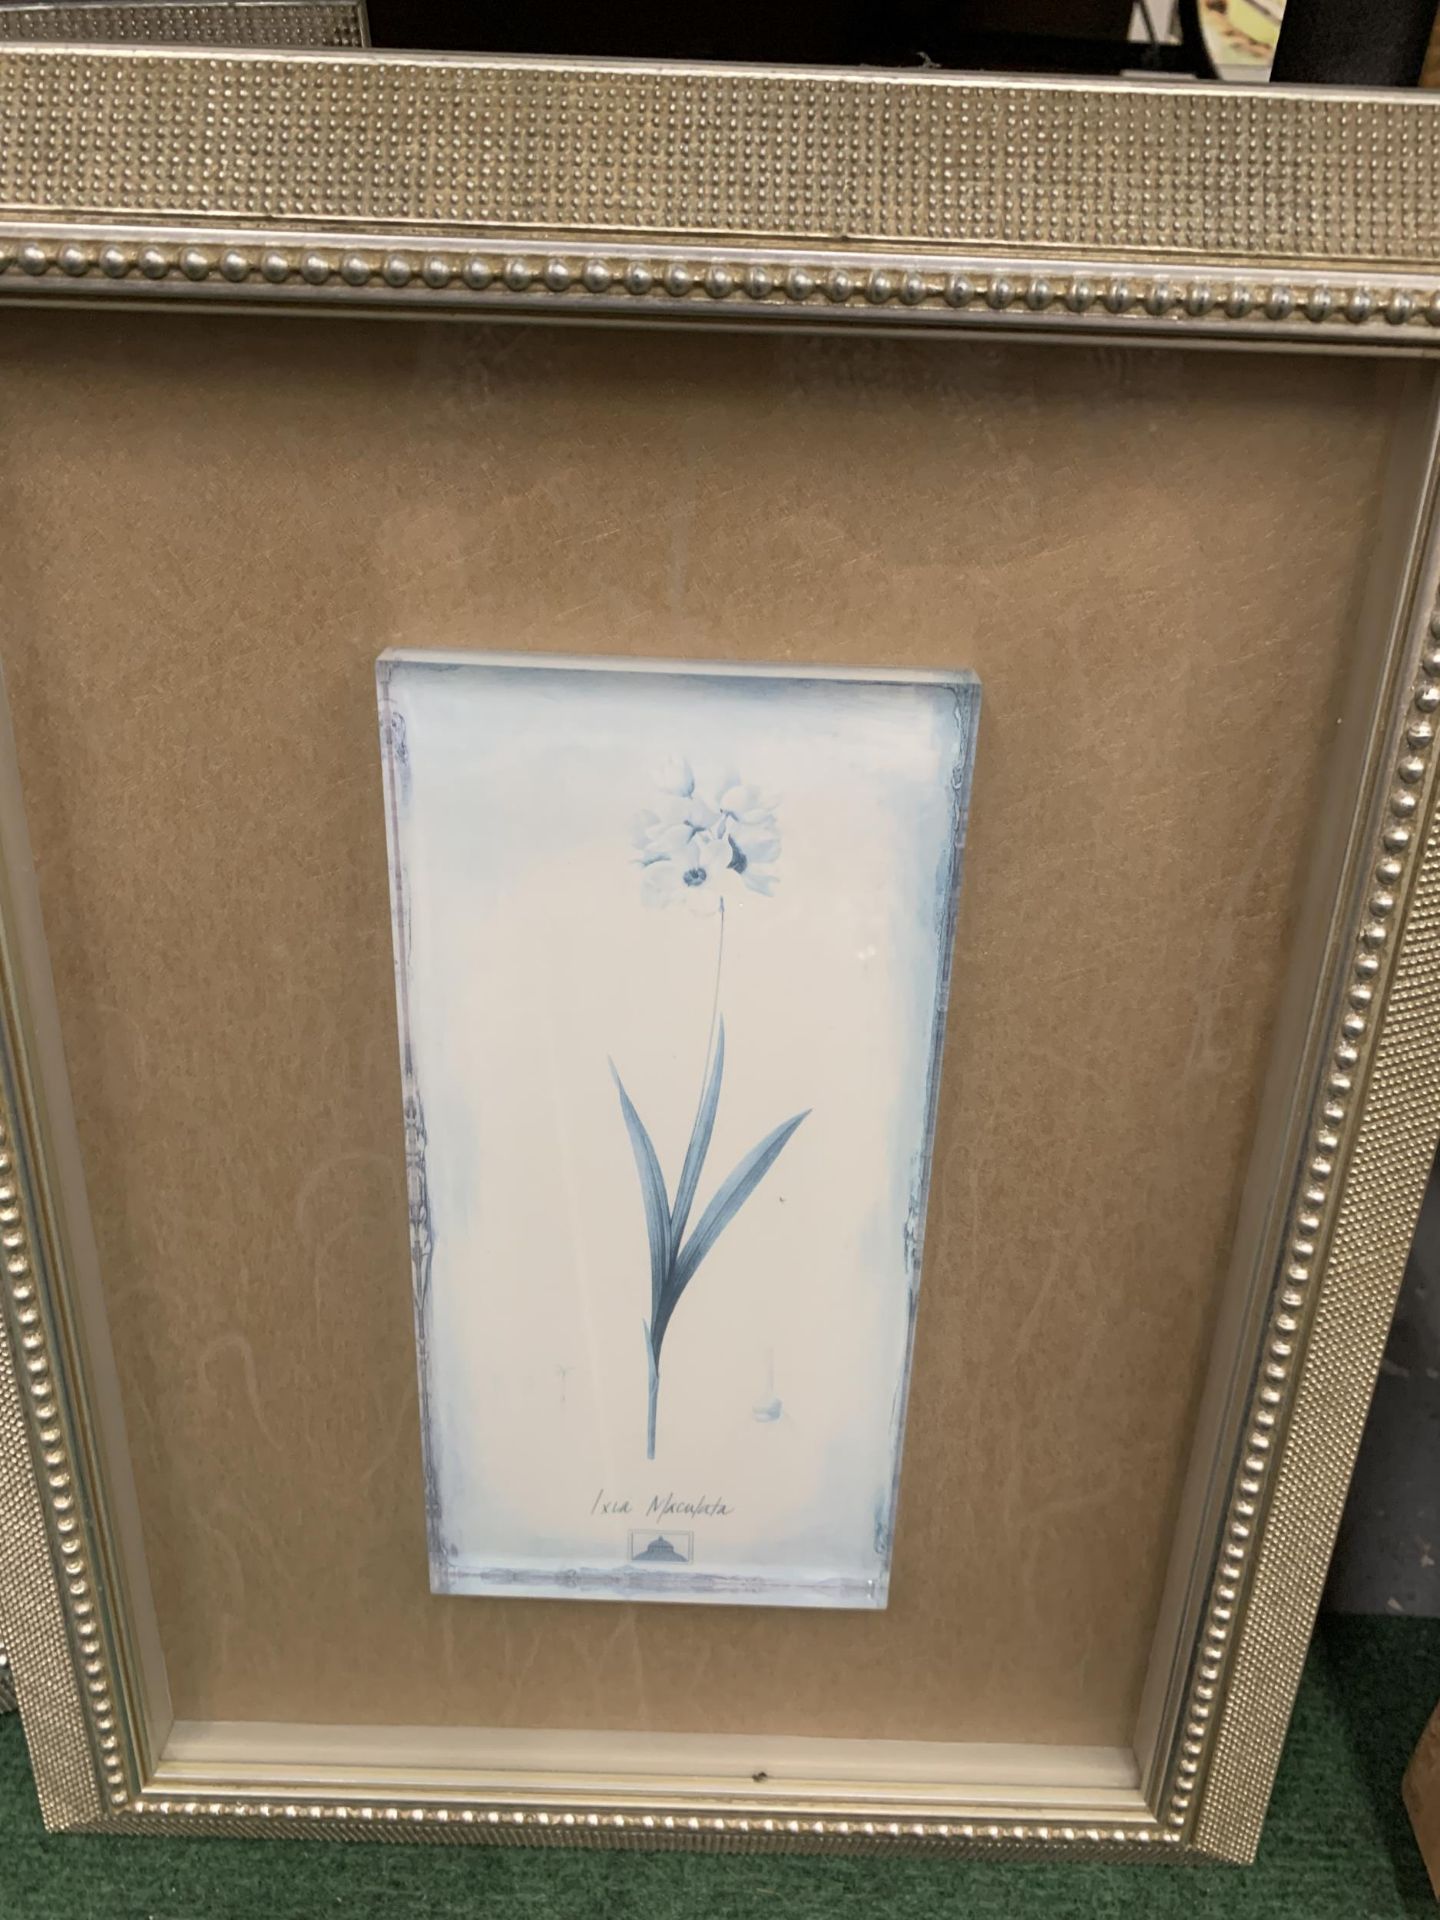 THREE FLORAL ENCAPSULATED GLASS ART DESIGNS IN A SILVER COLOURED FRAME (TWO 18" X 14" AND A 16" X - Image 3 of 4